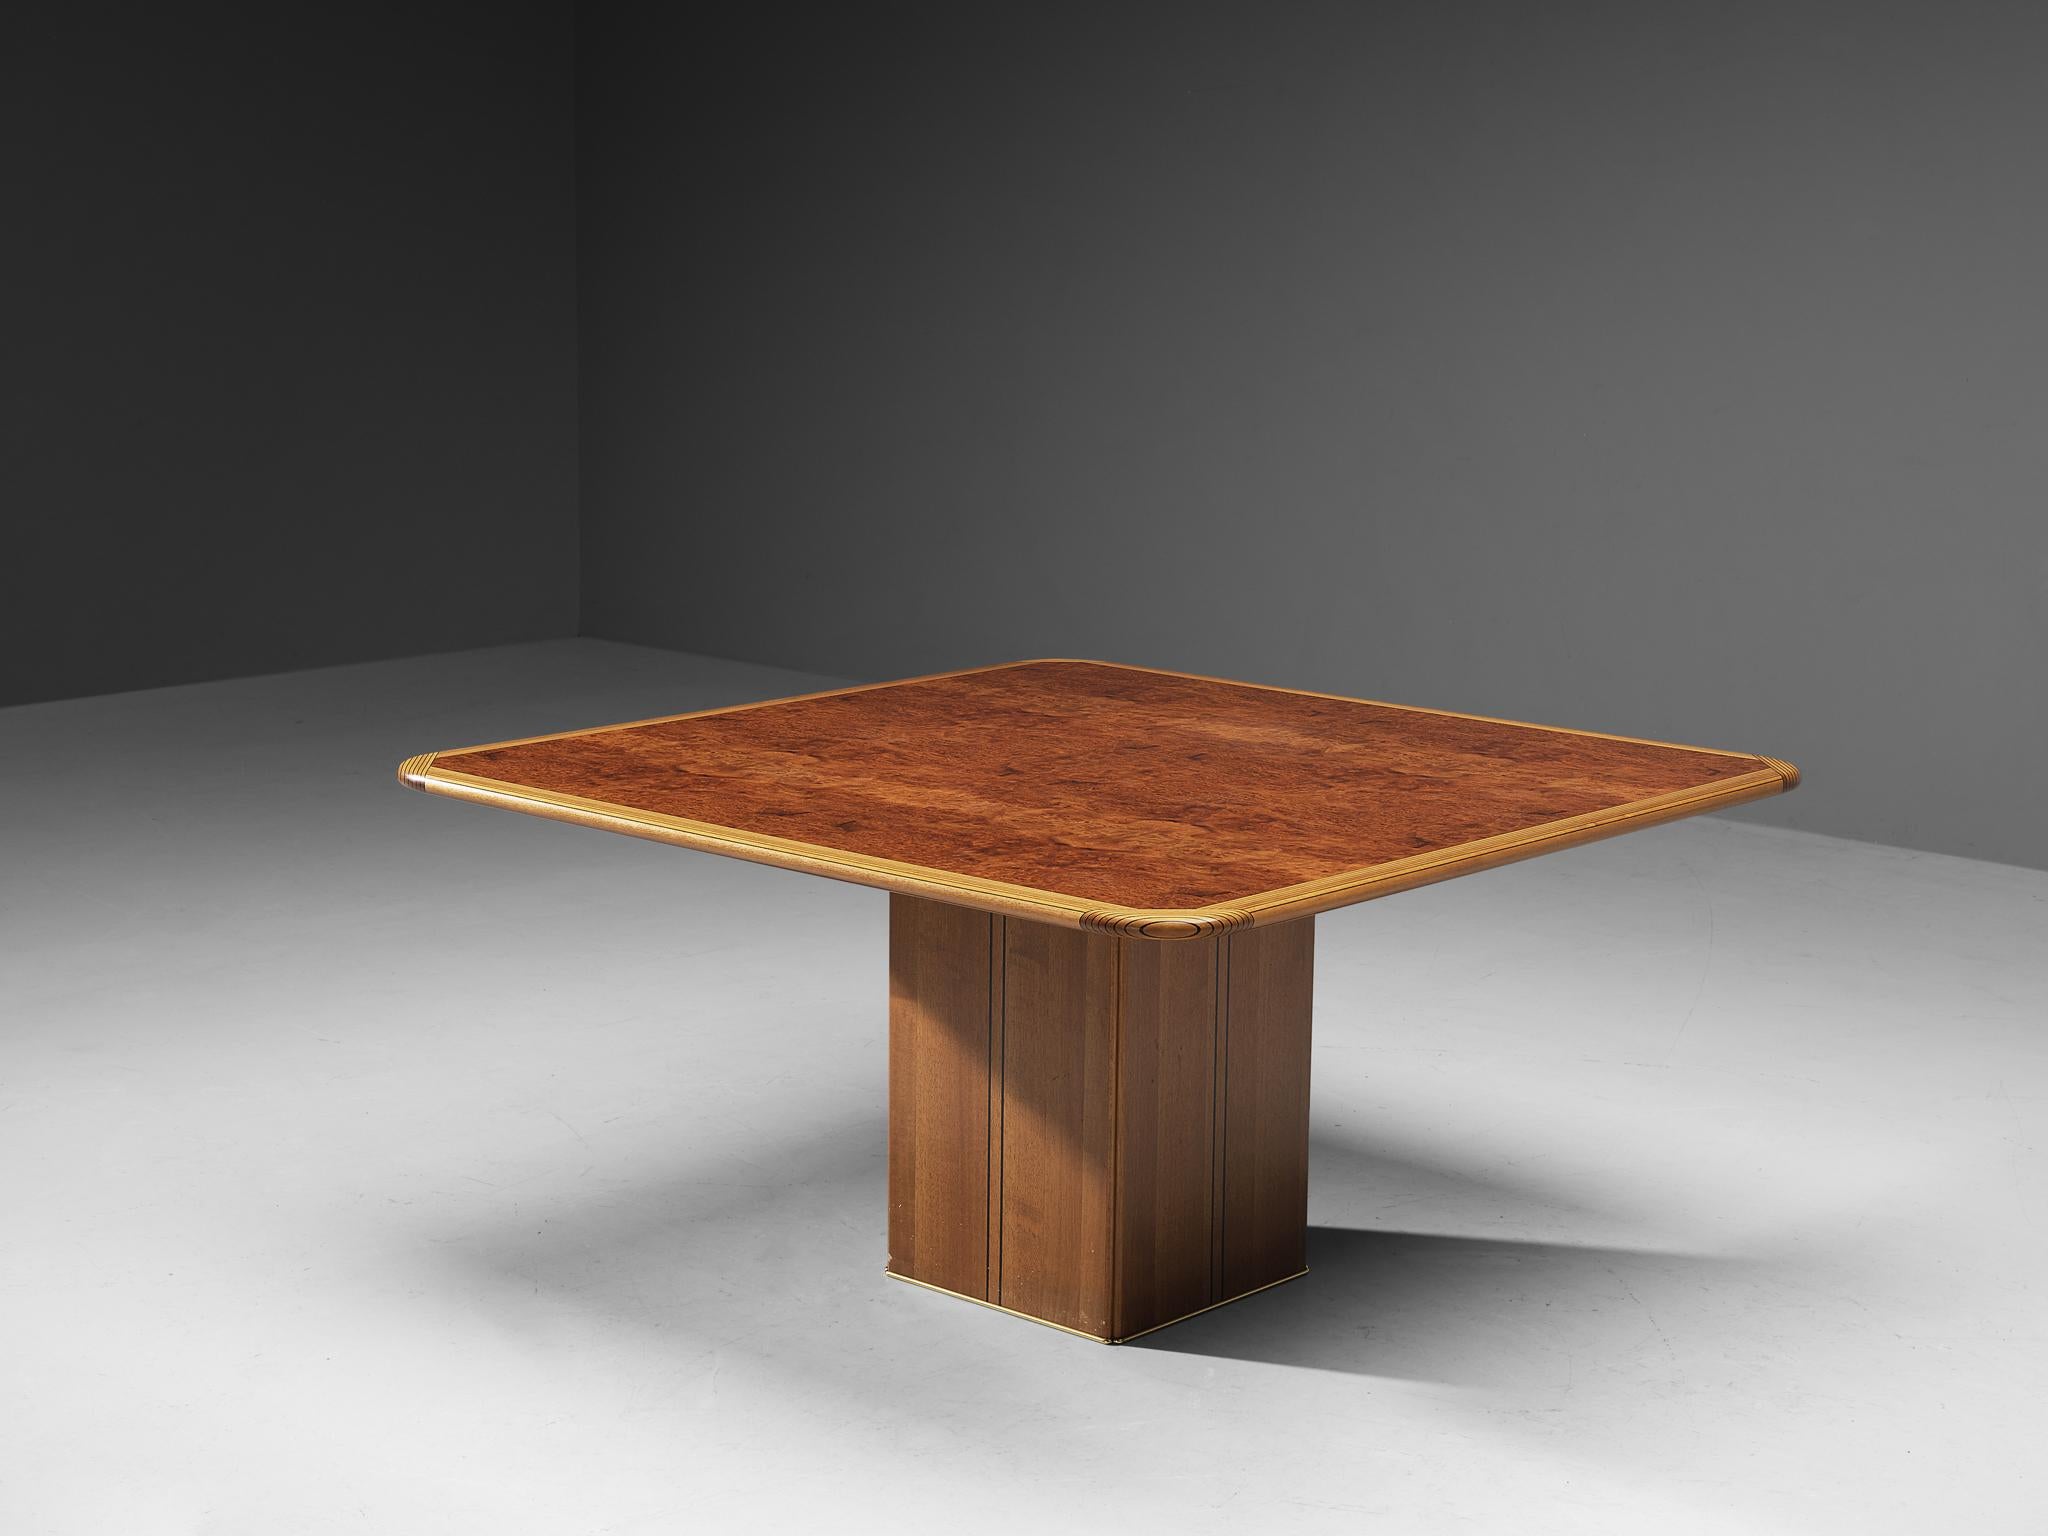 Afra & Tobia Scarpa for Maxalto, square dining table model ‘Artona’, walnut, walnut burl, Italy, 1975

This lovely and lavish table was designed by Afra & Tobia Scarpa within the ‘Artona’ line for Maxalto. On a squared pedestal base rests a square